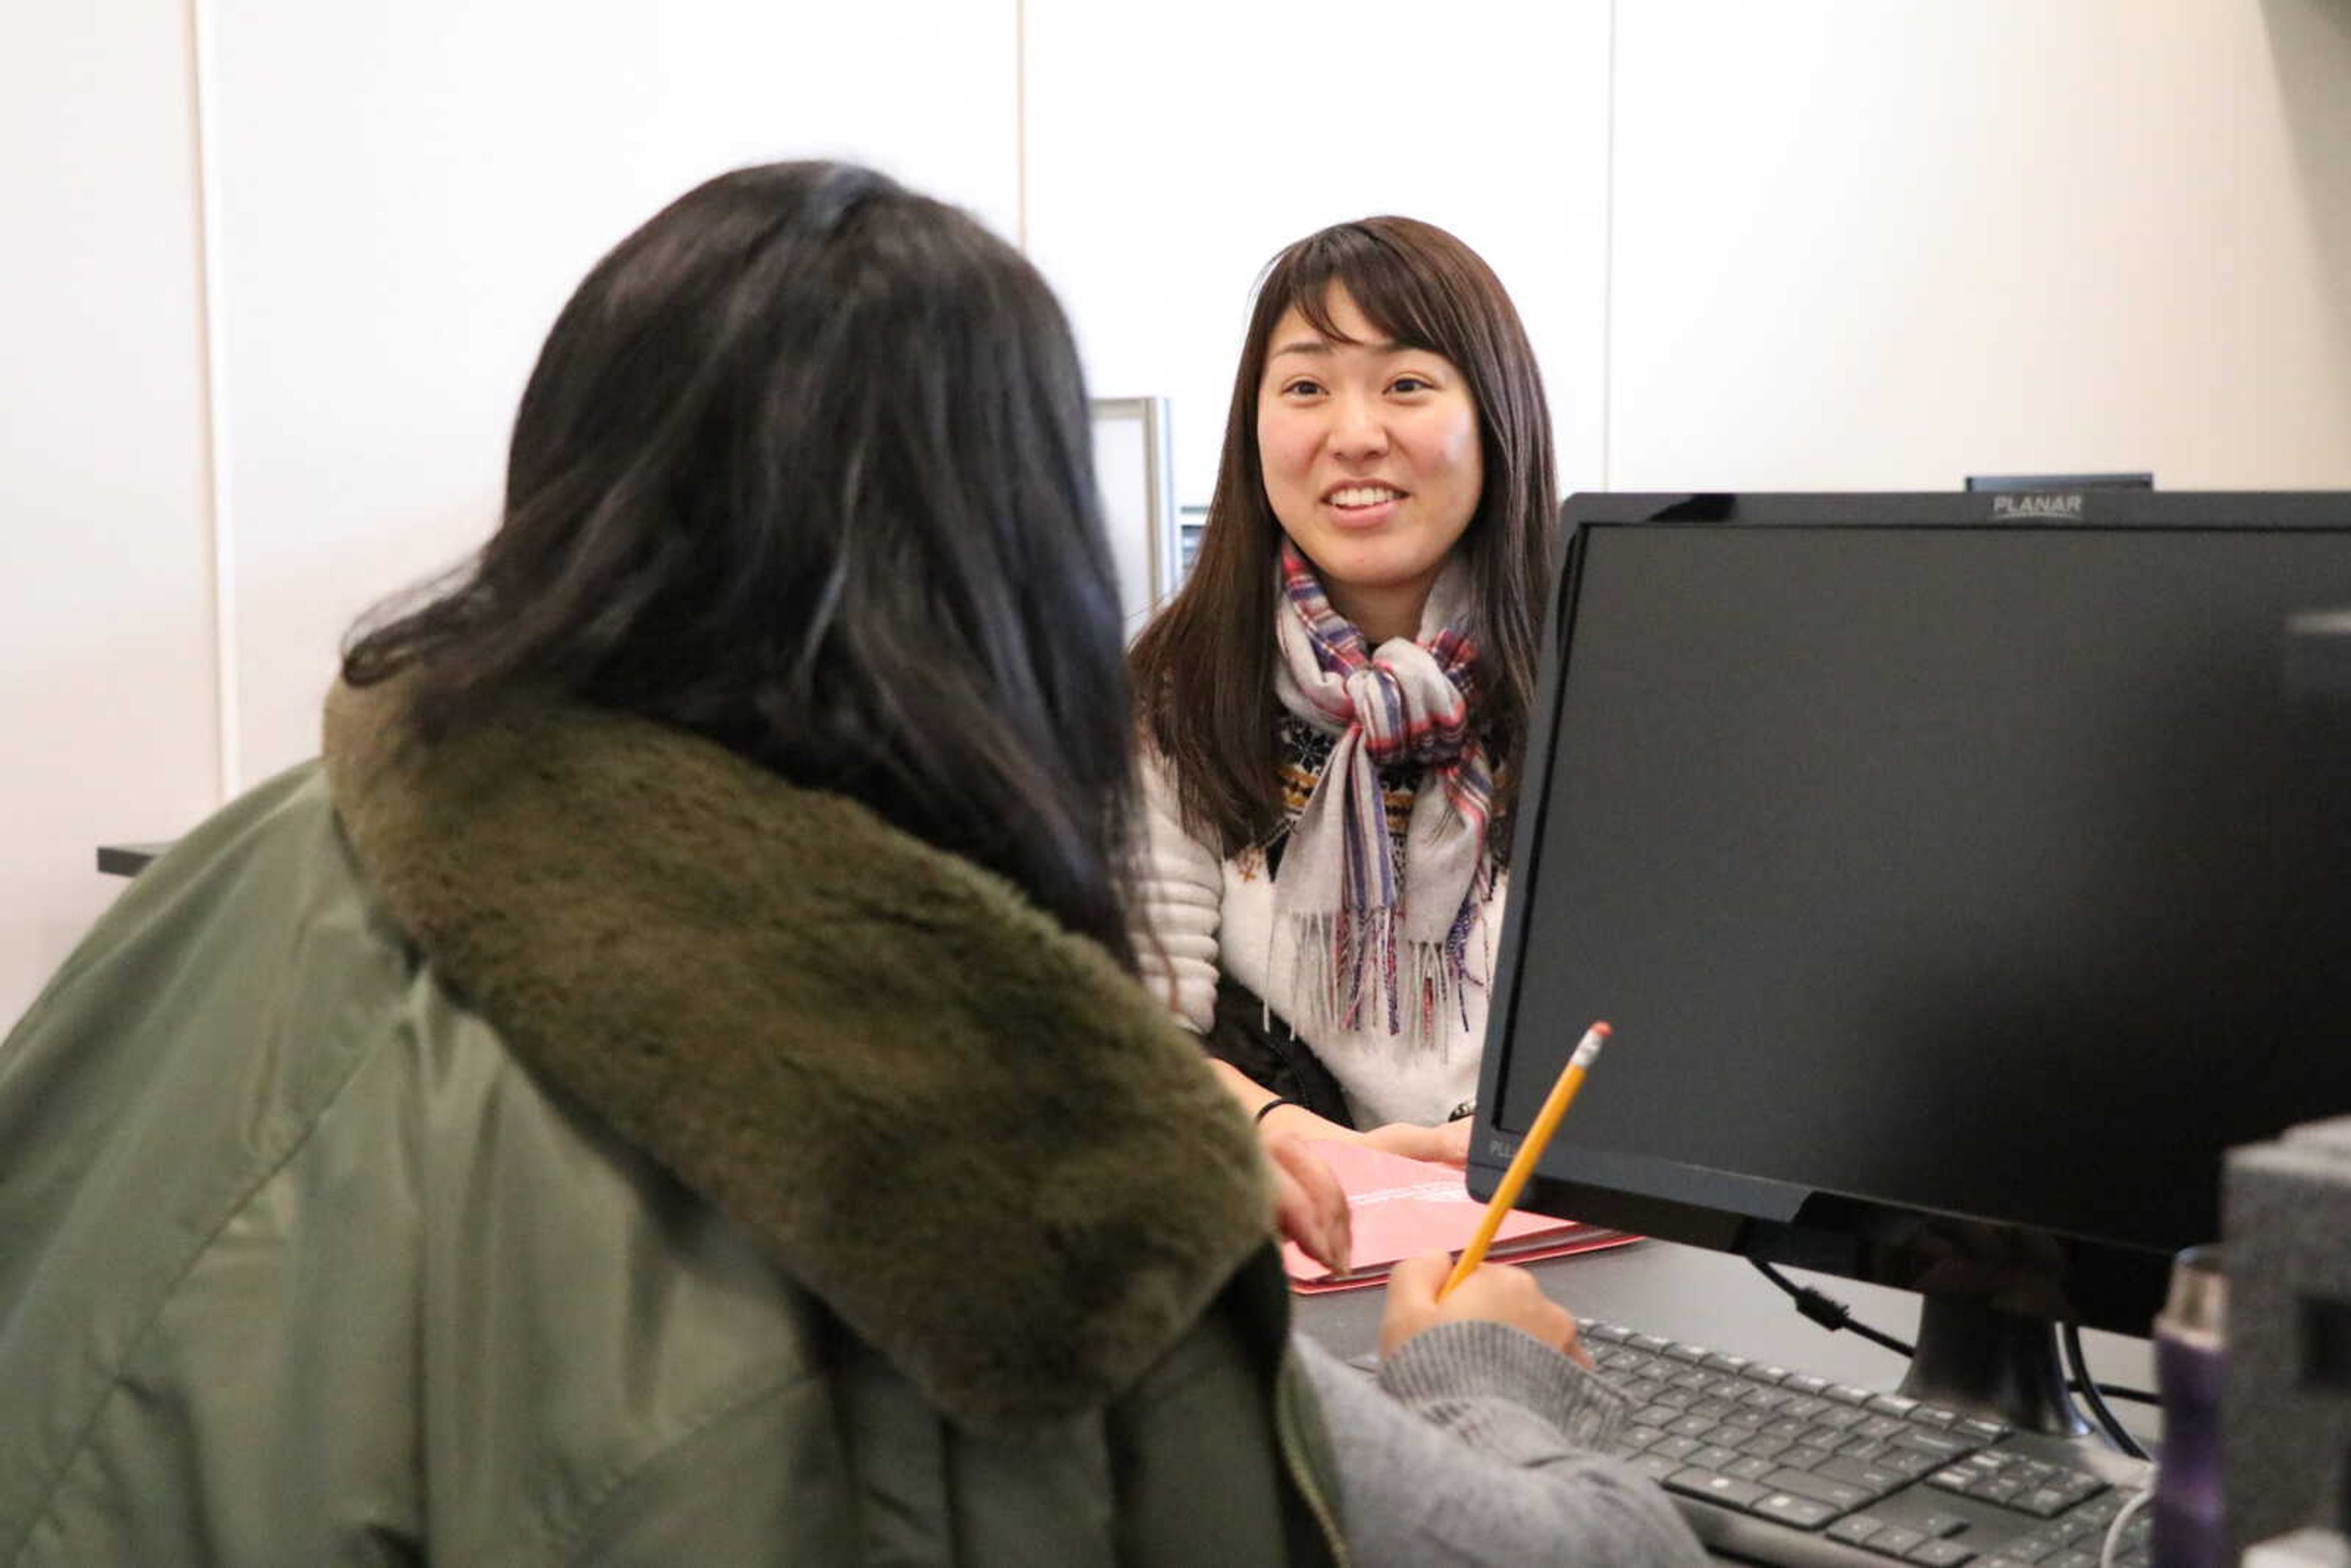 Utana Honnami attends the Tutoring Services lab in the International Village.